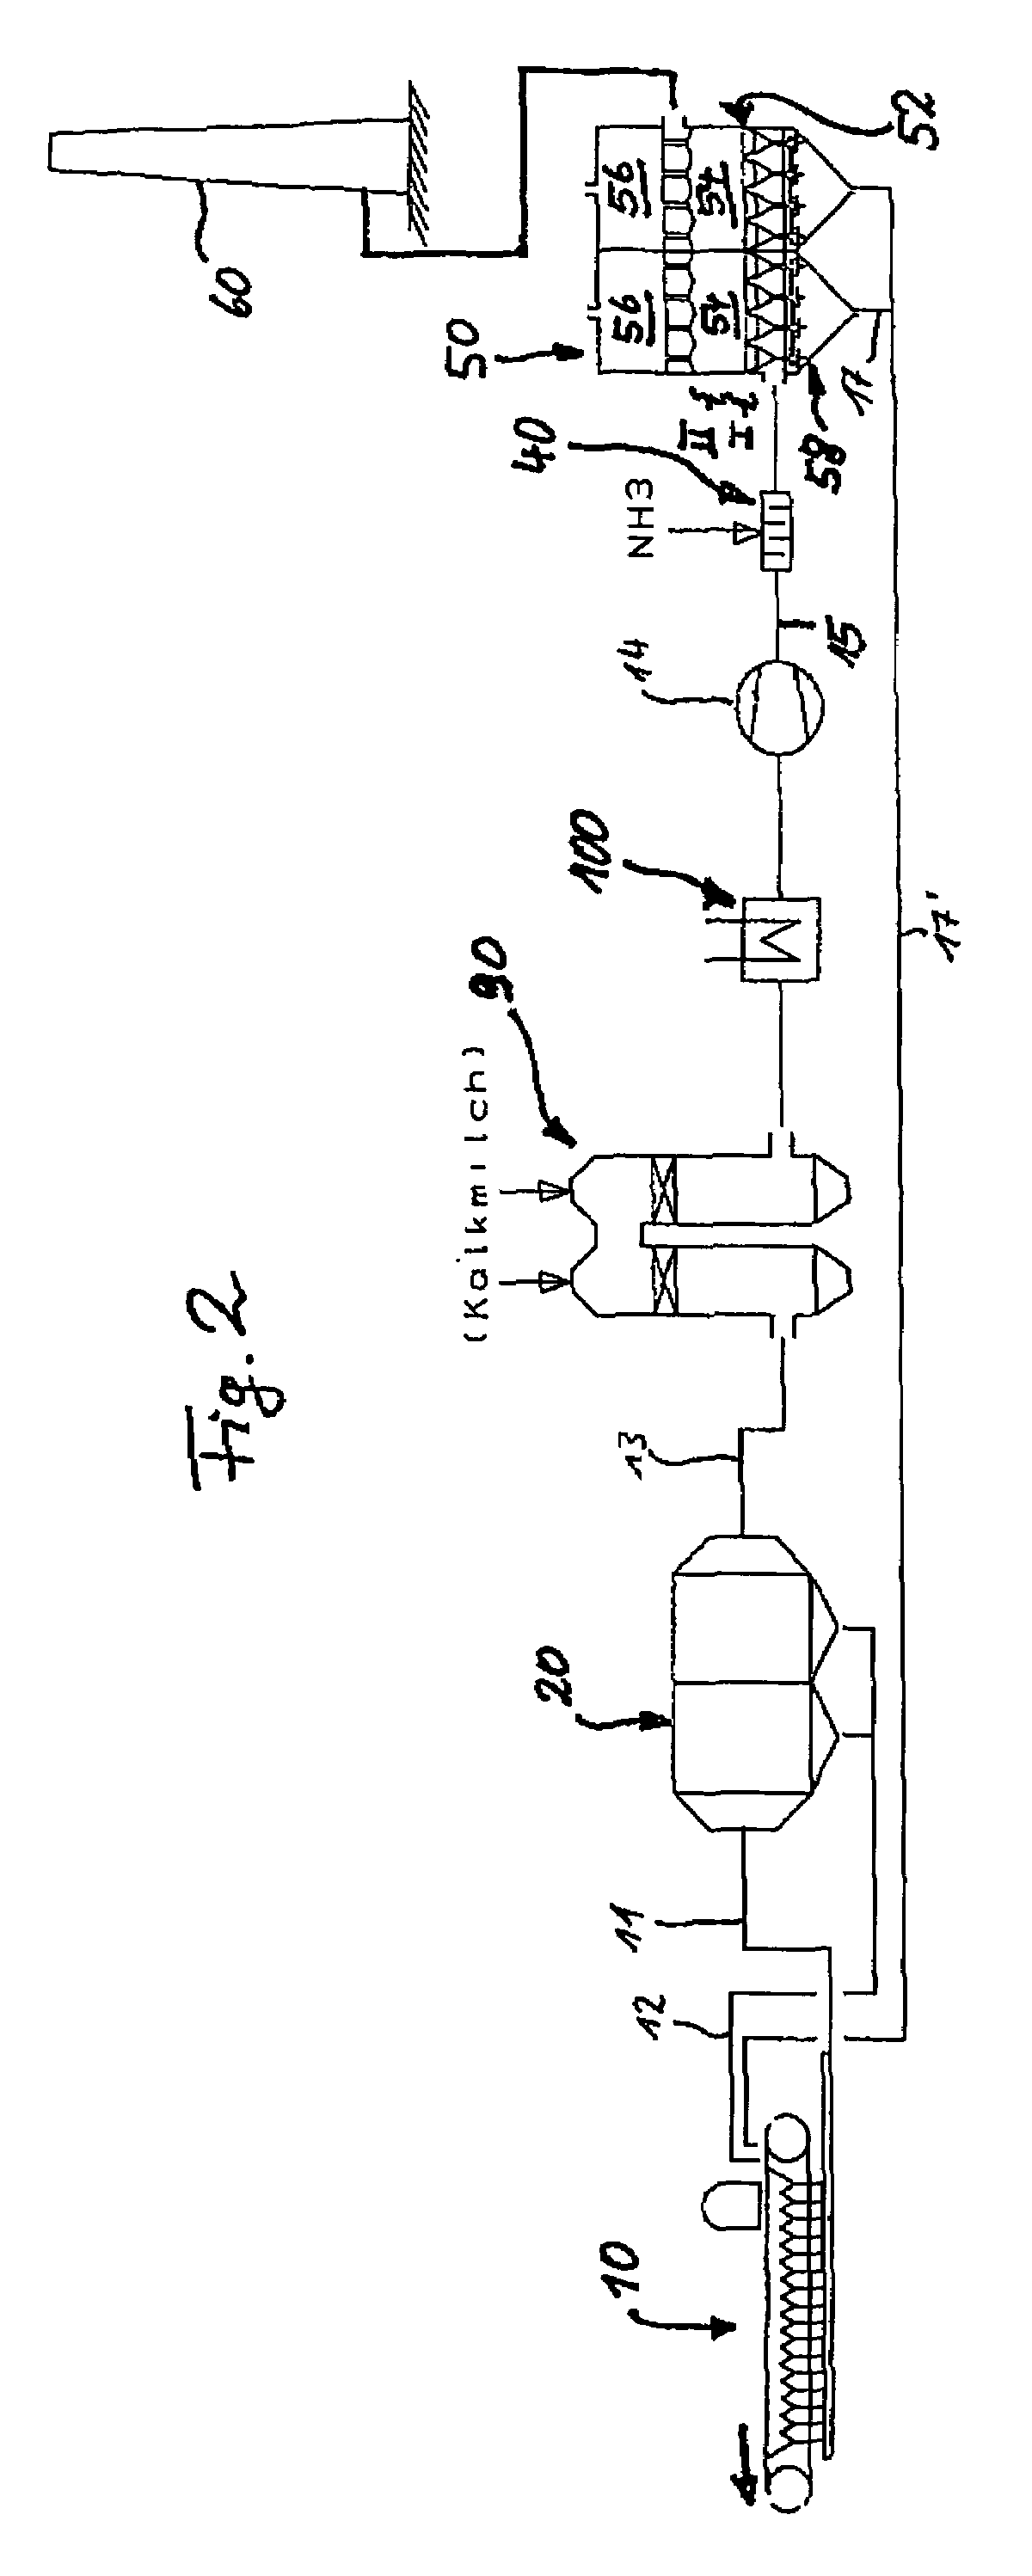 Method for cleaning exhaust gases produced by a sintering process for ores and/or other metal-containing materials in metal production